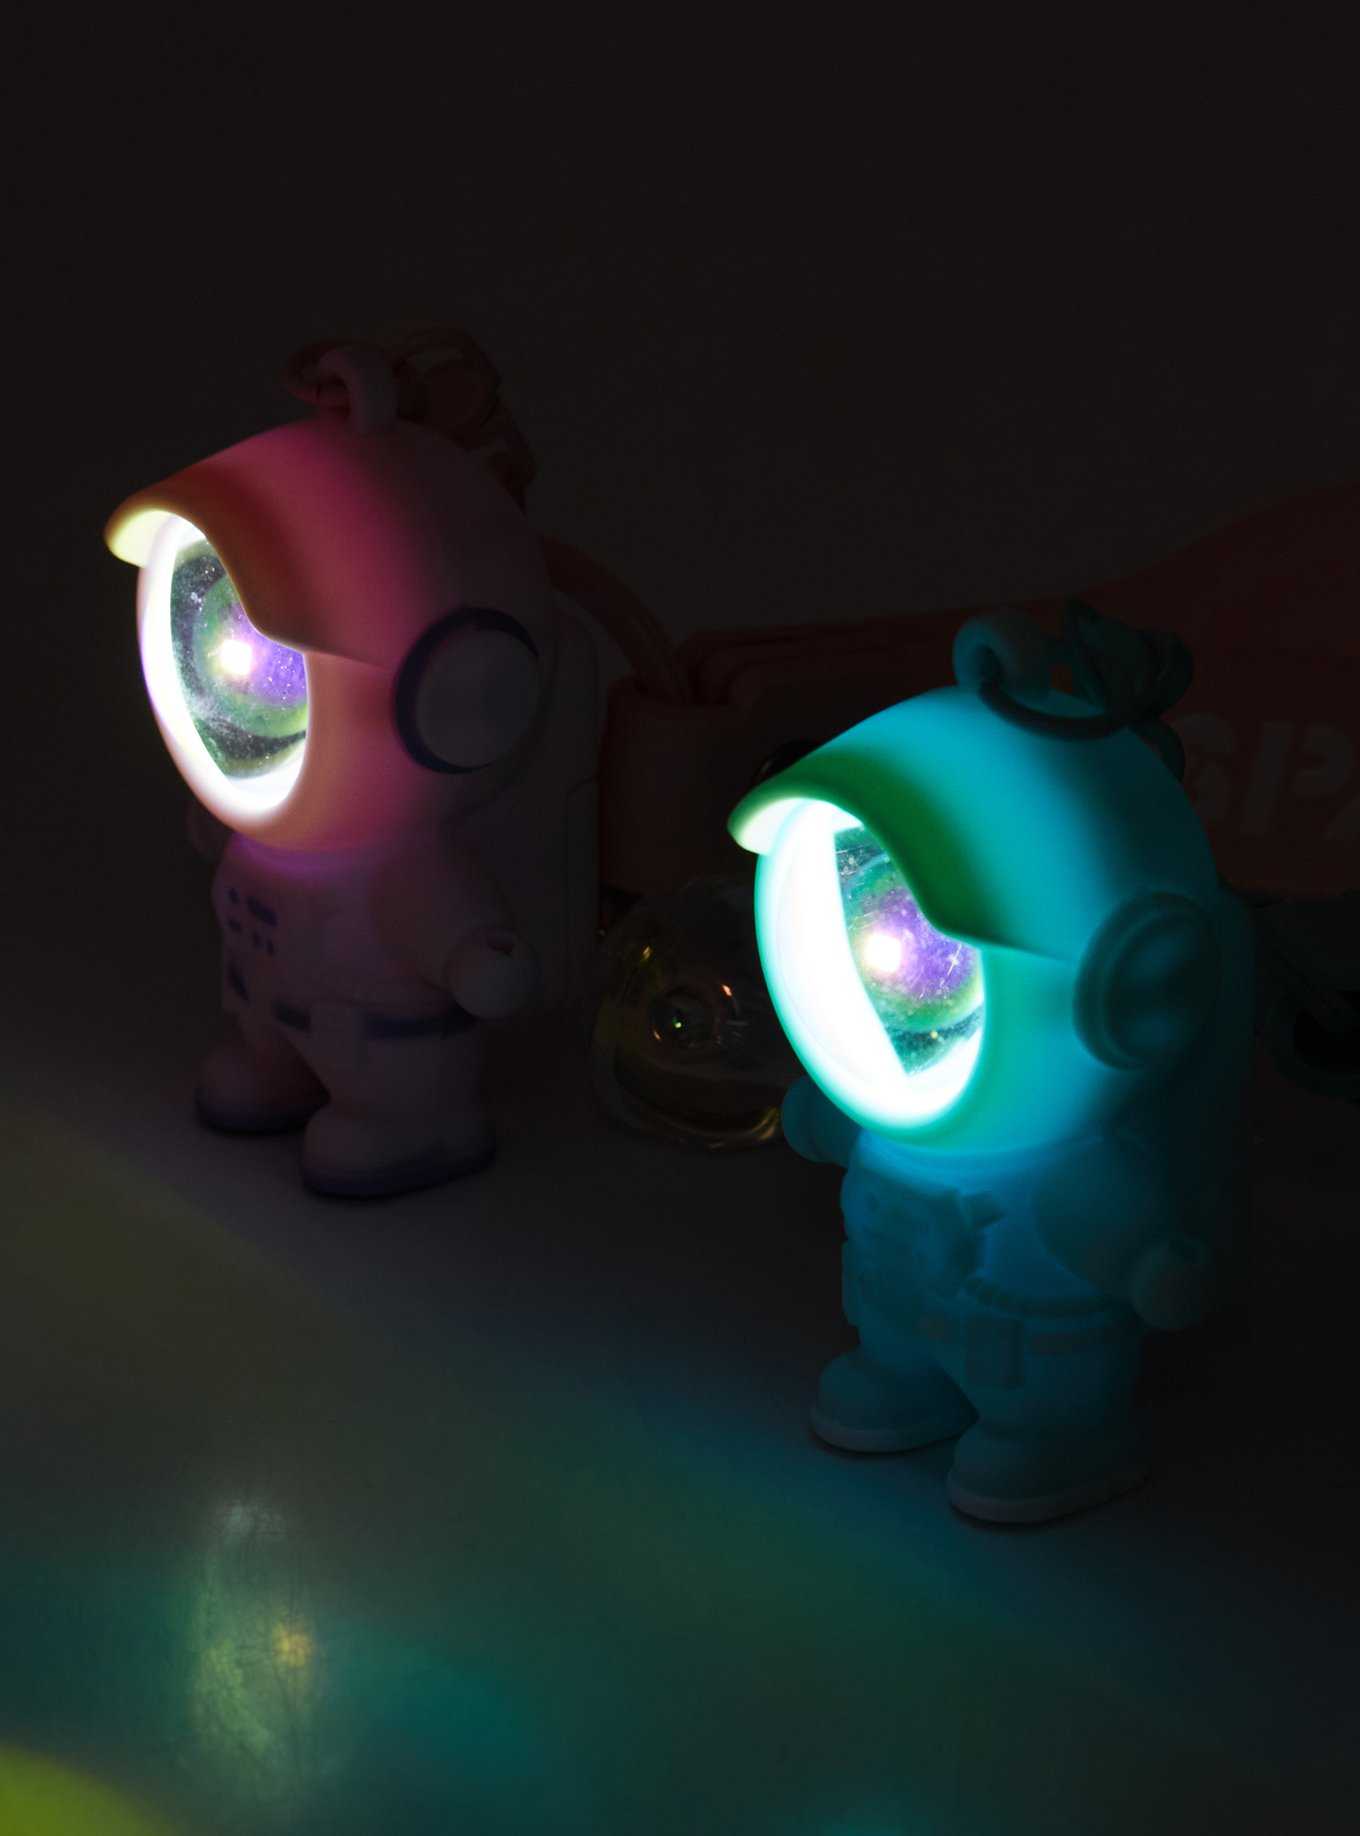 Astronaut Light-Up Assorted Key Chain, , hi-res